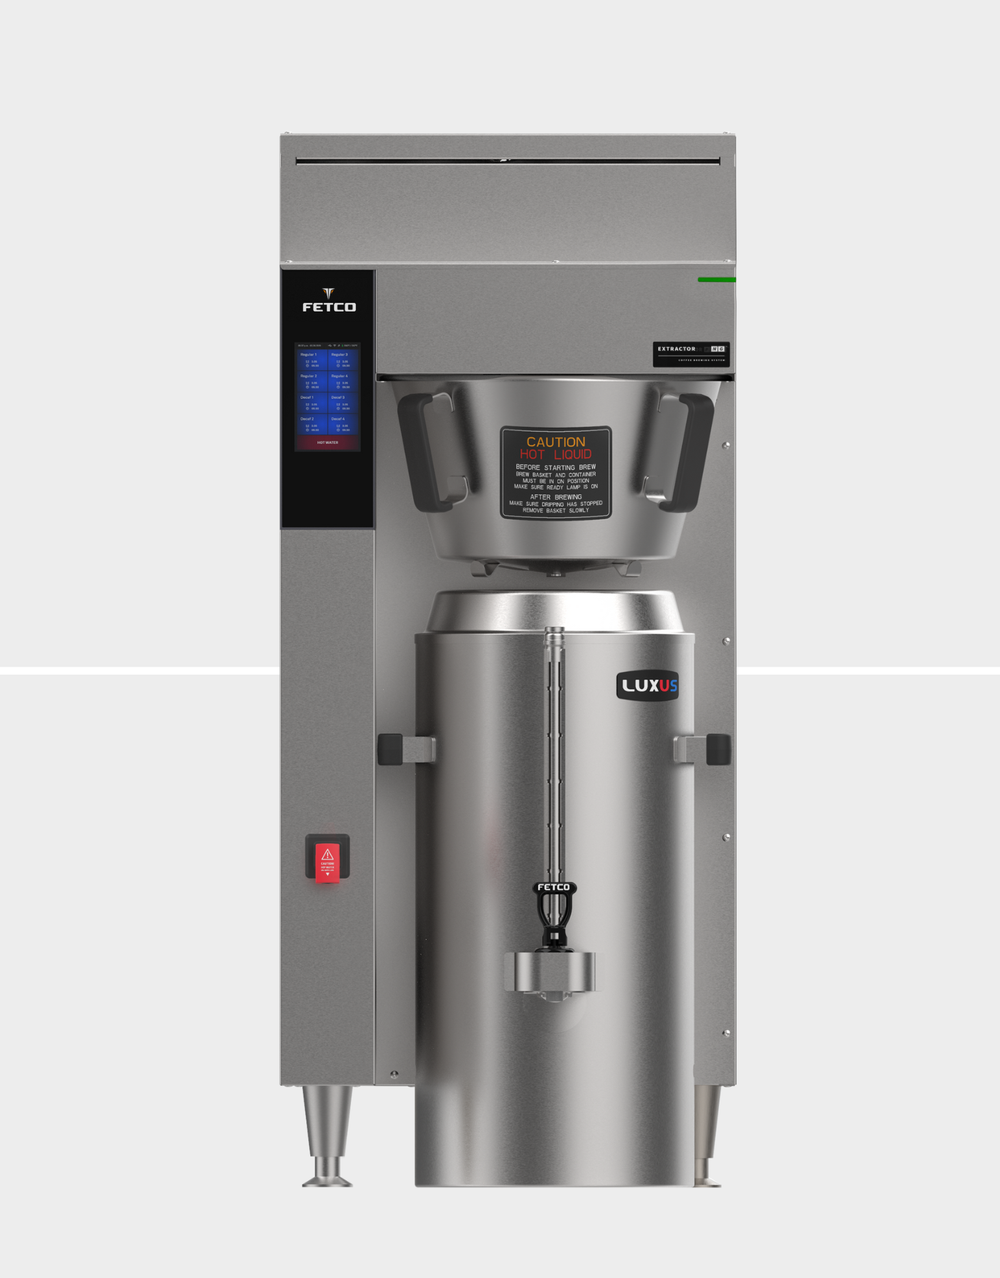 Fetco - CBS-2261 NG Single Station Coffee Brewer